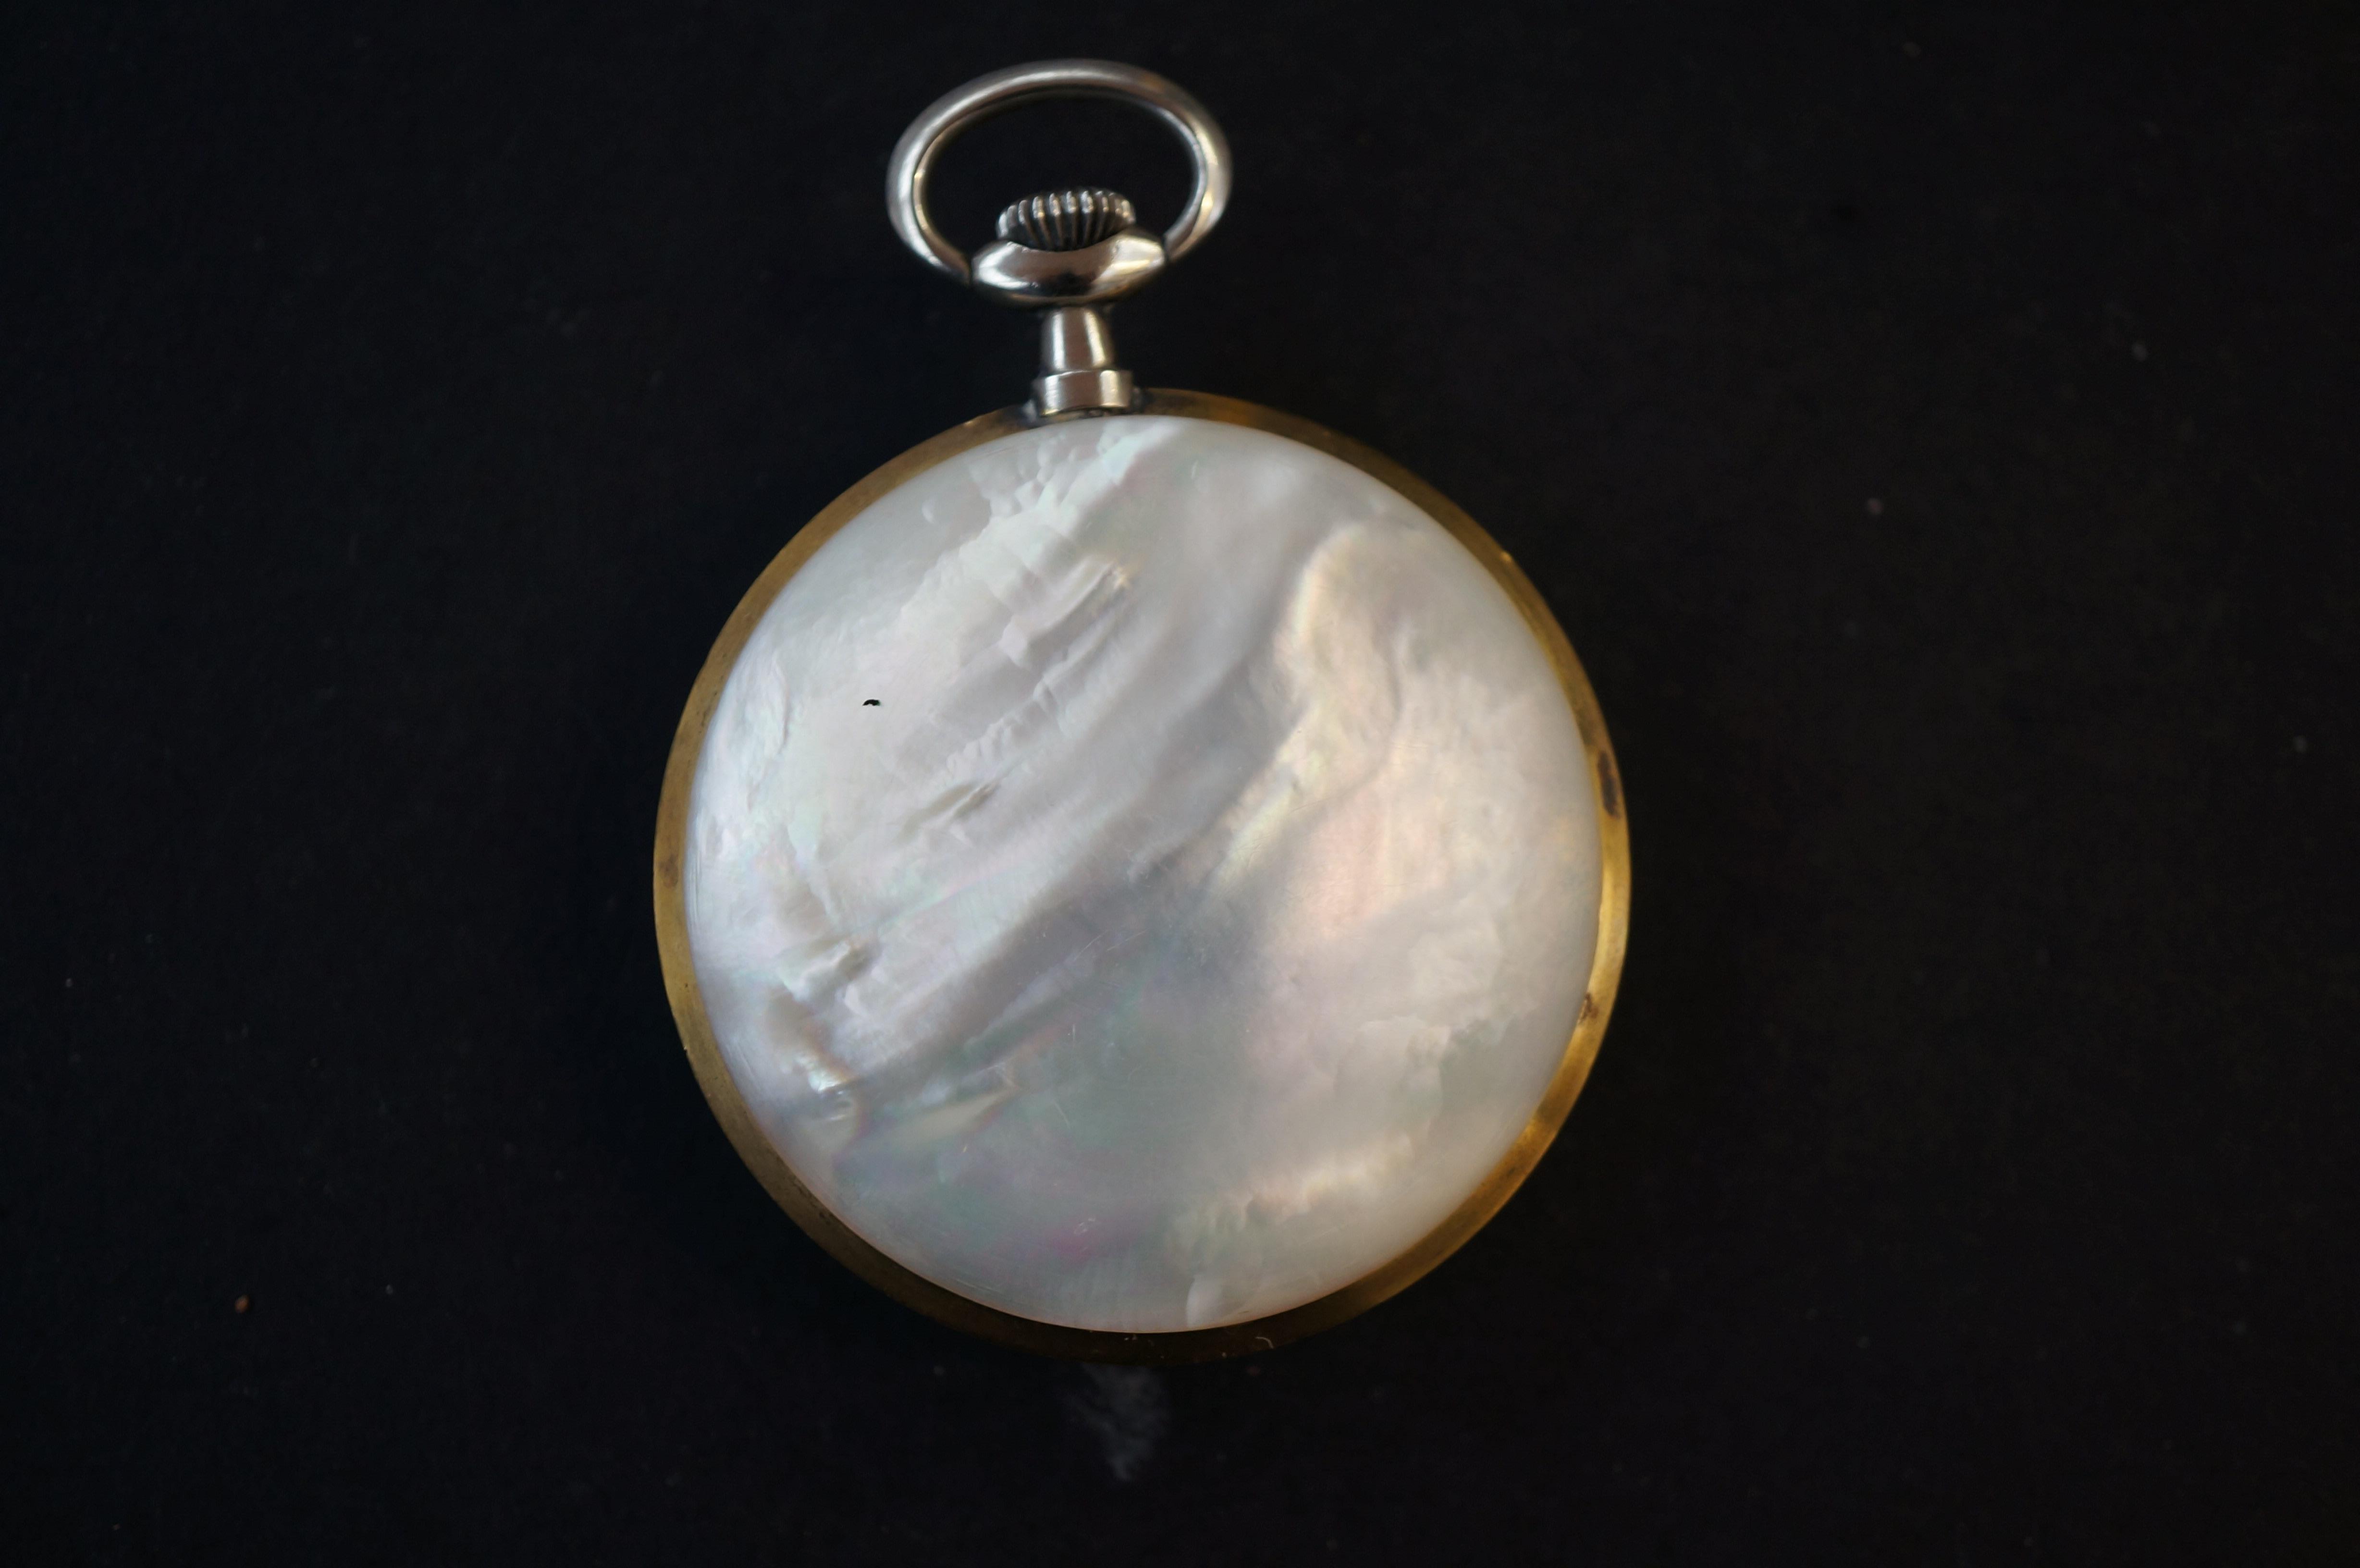 Locust mother of pearl pocket watch - currently ti - Image 2 of 2